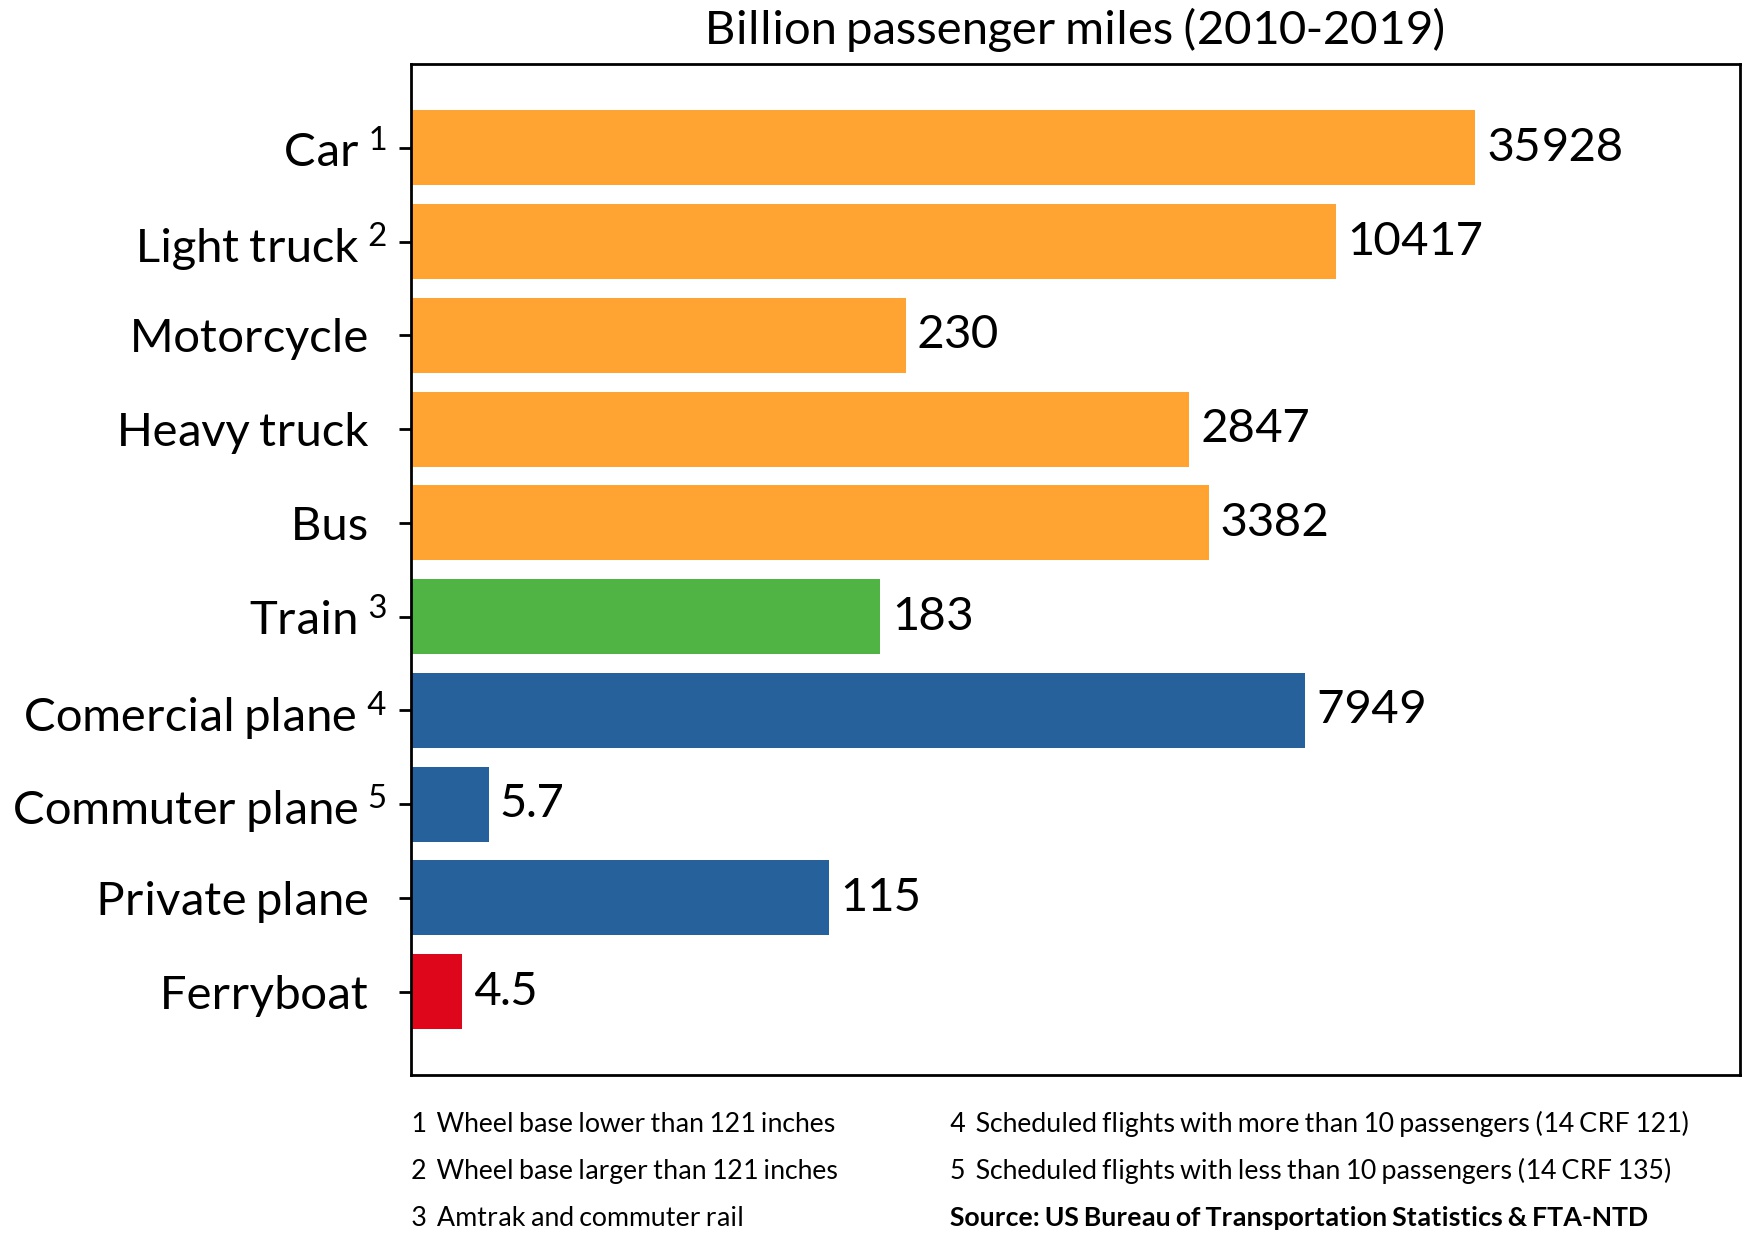 passenger miles from different transportation modes between 2010-2019